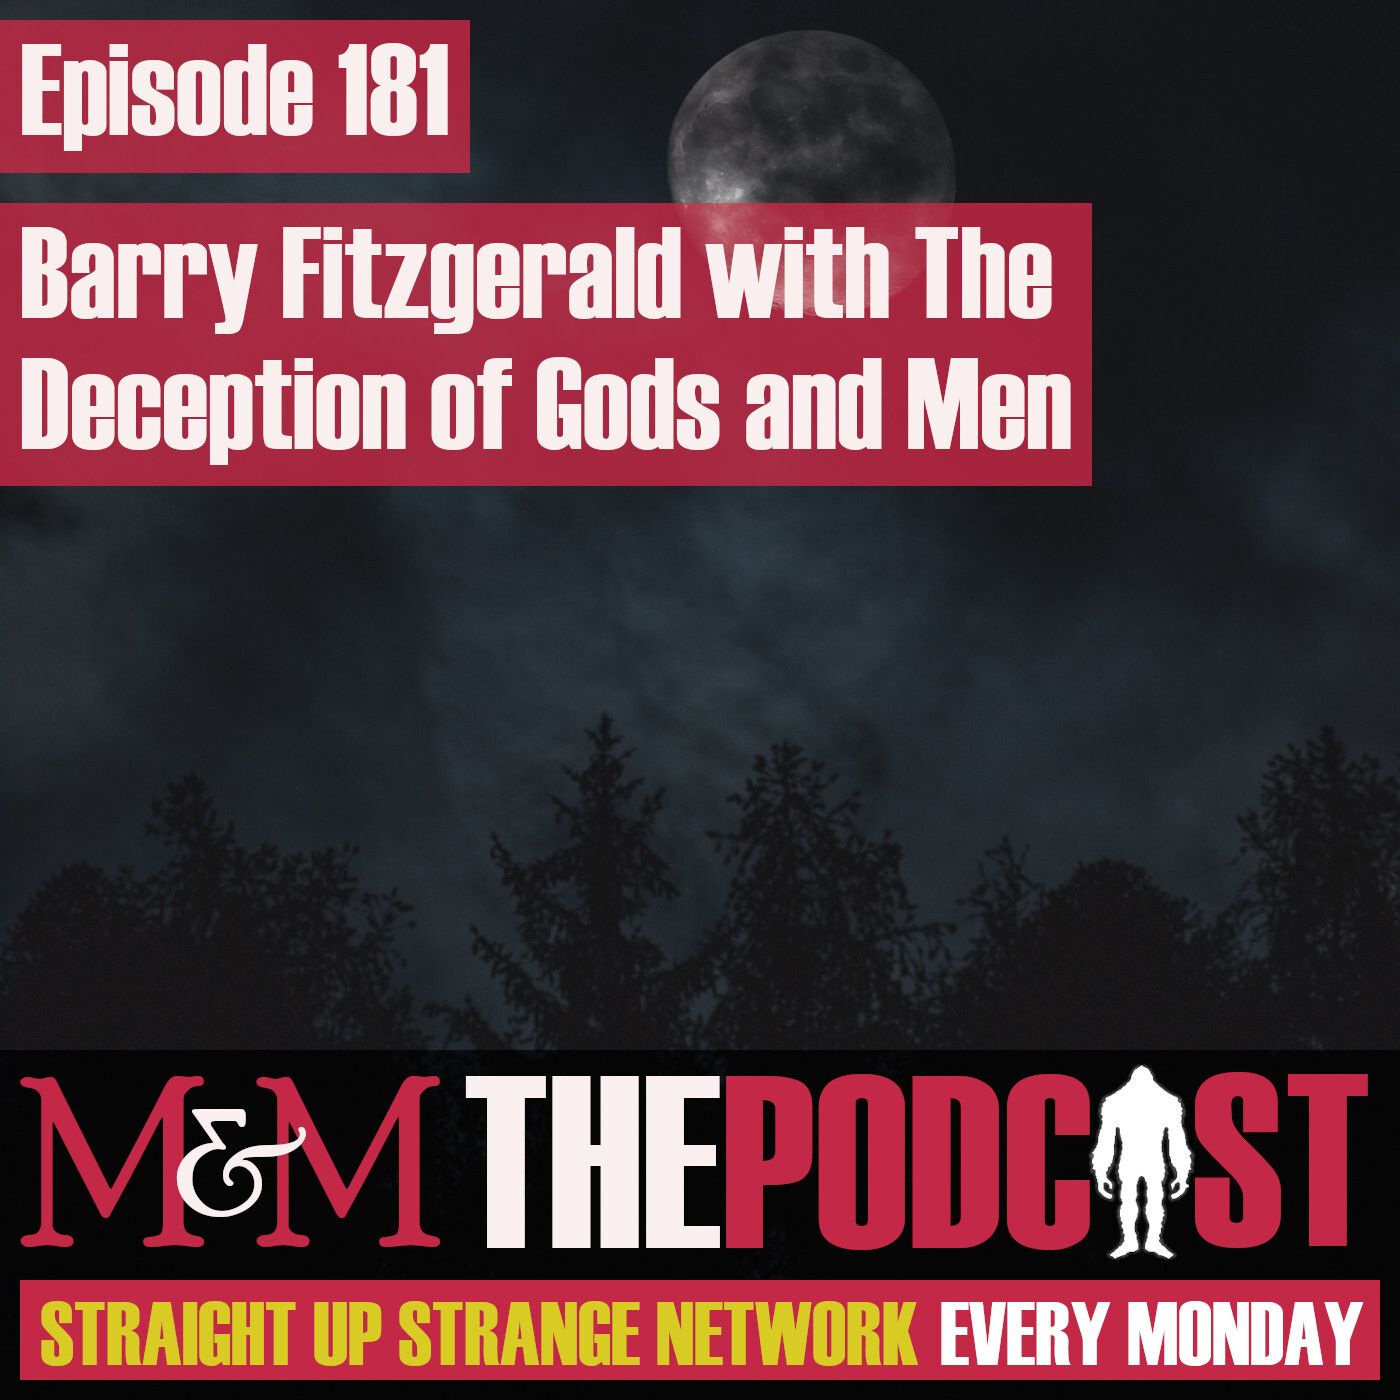 Mysteries and Monsters: Episode 181 Barry Fitzgerald with The Deception of Gods and Men